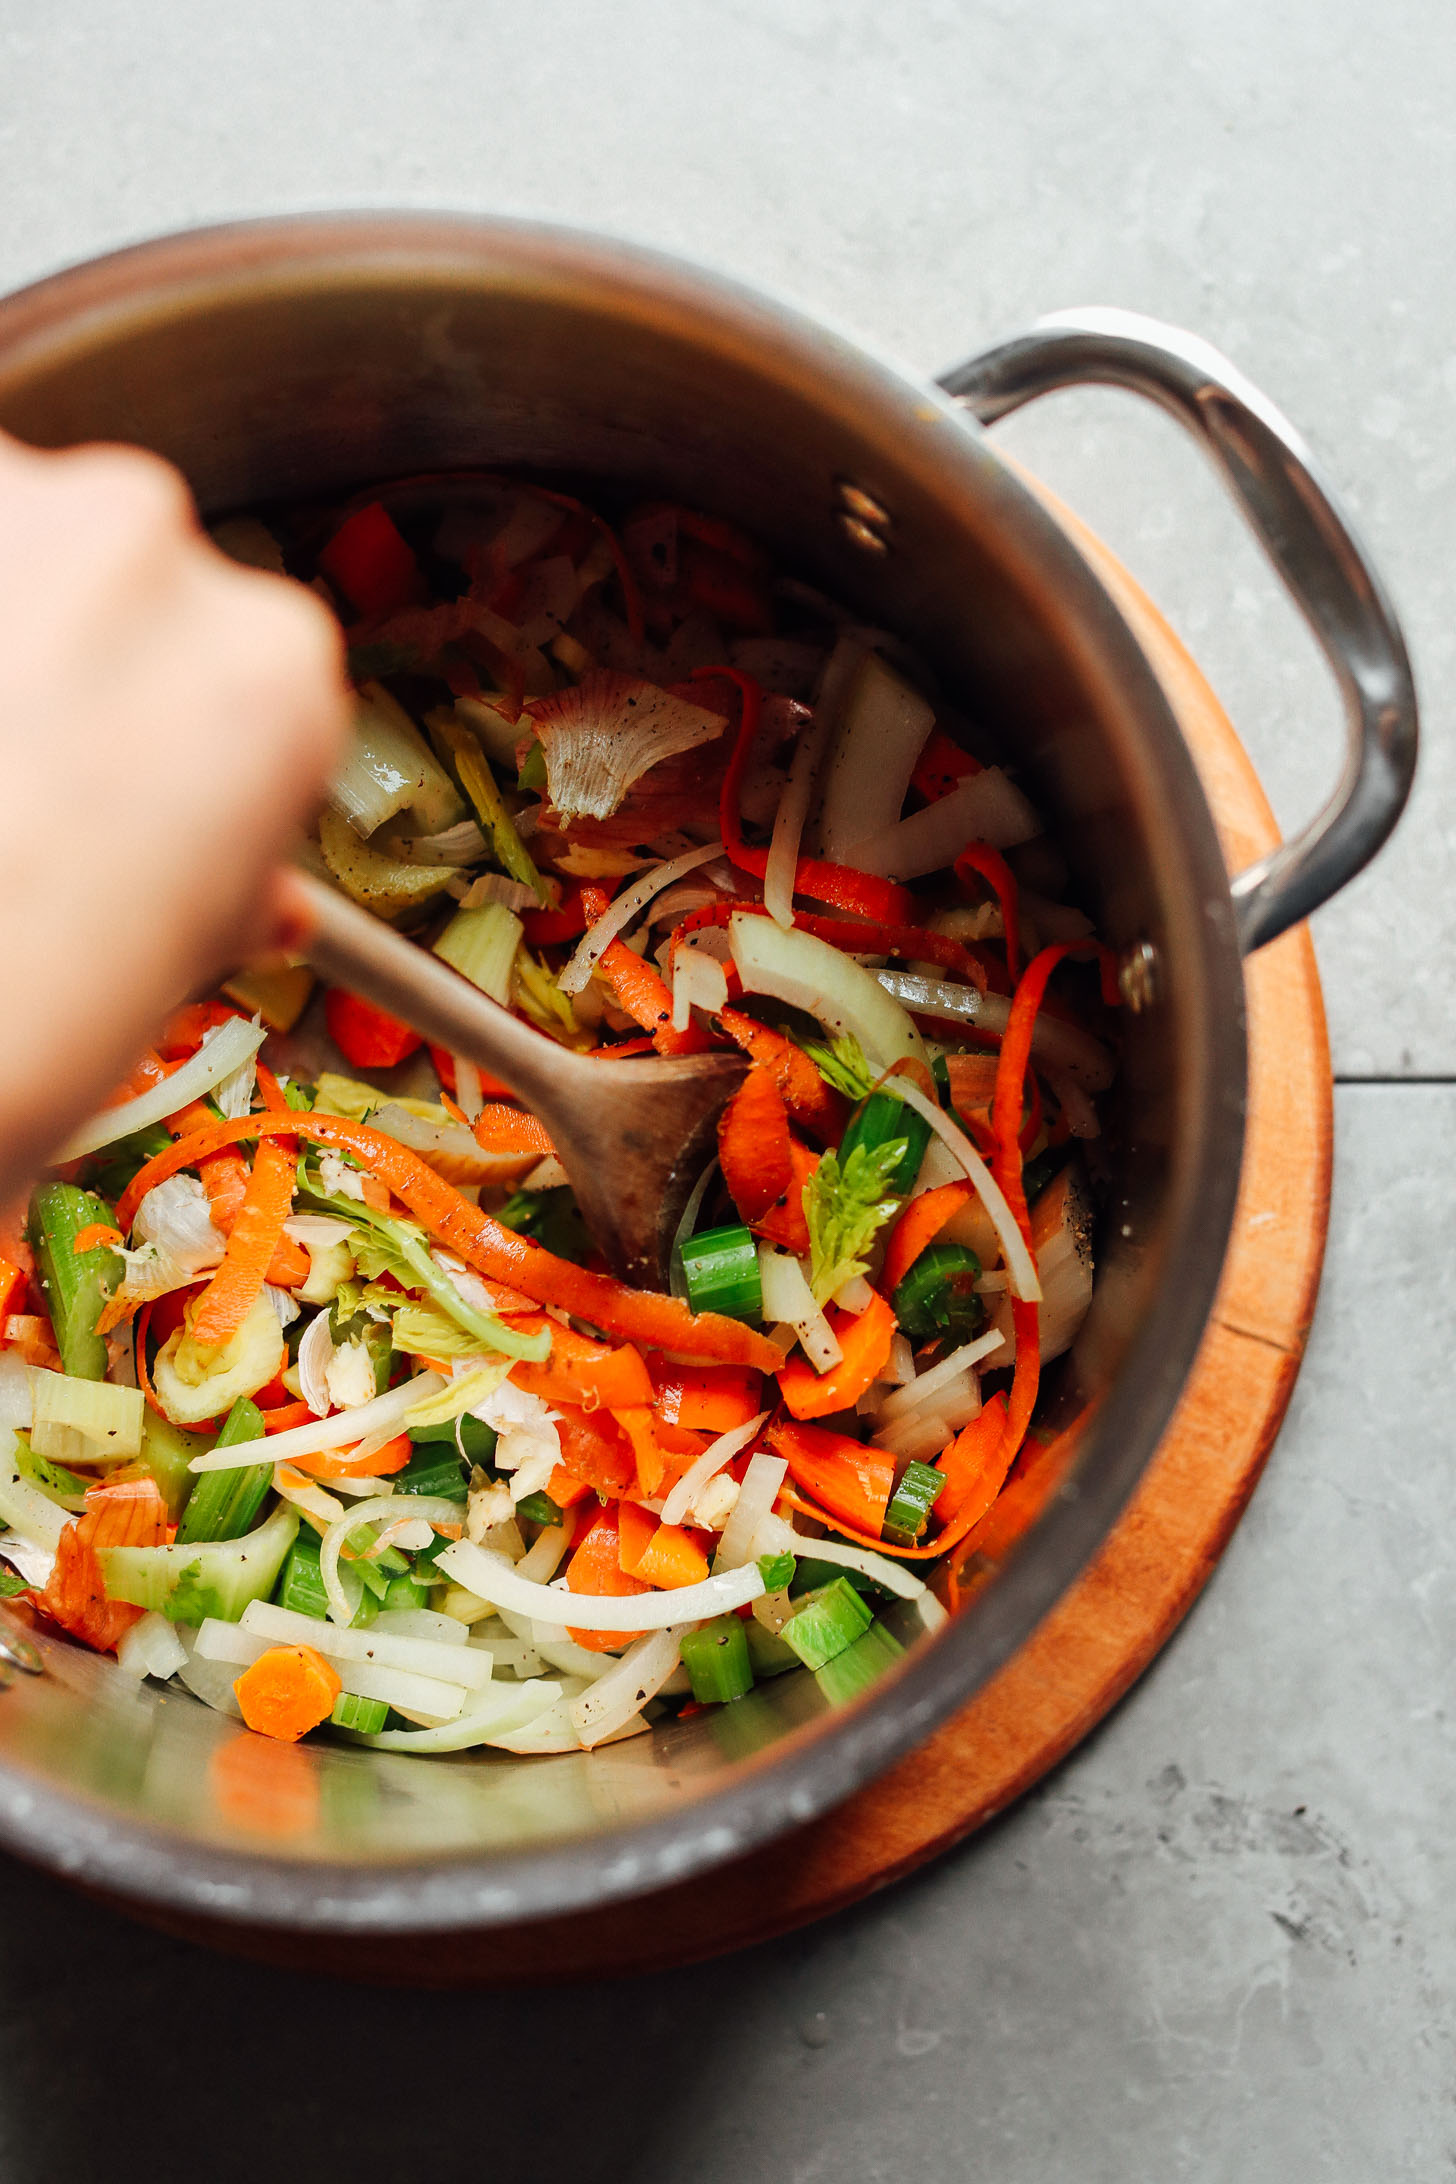 Stirring a big pot with vegetables for making the BEST homemade vegetable broth